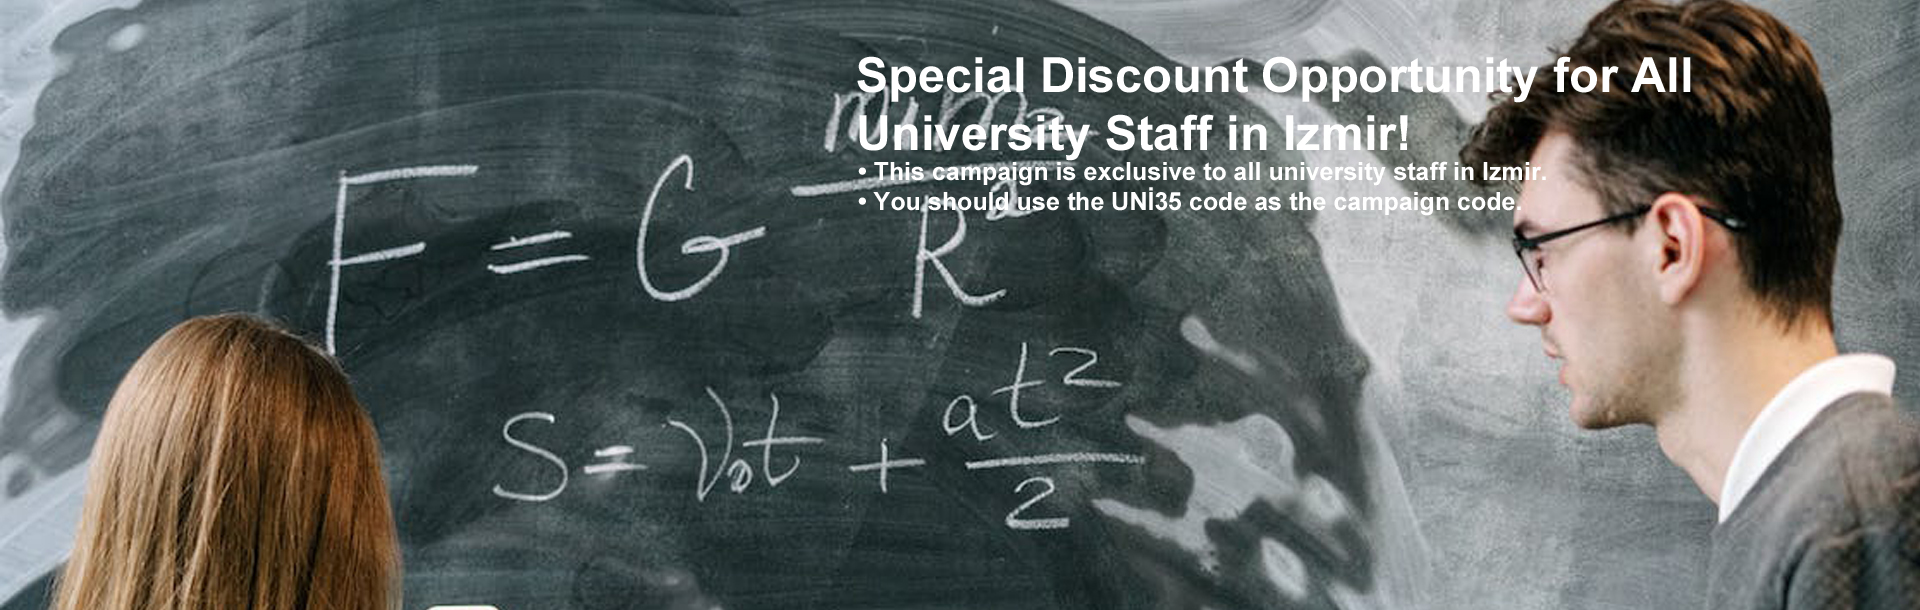 Special Discount Opportunity for All University Staff in Izmir!